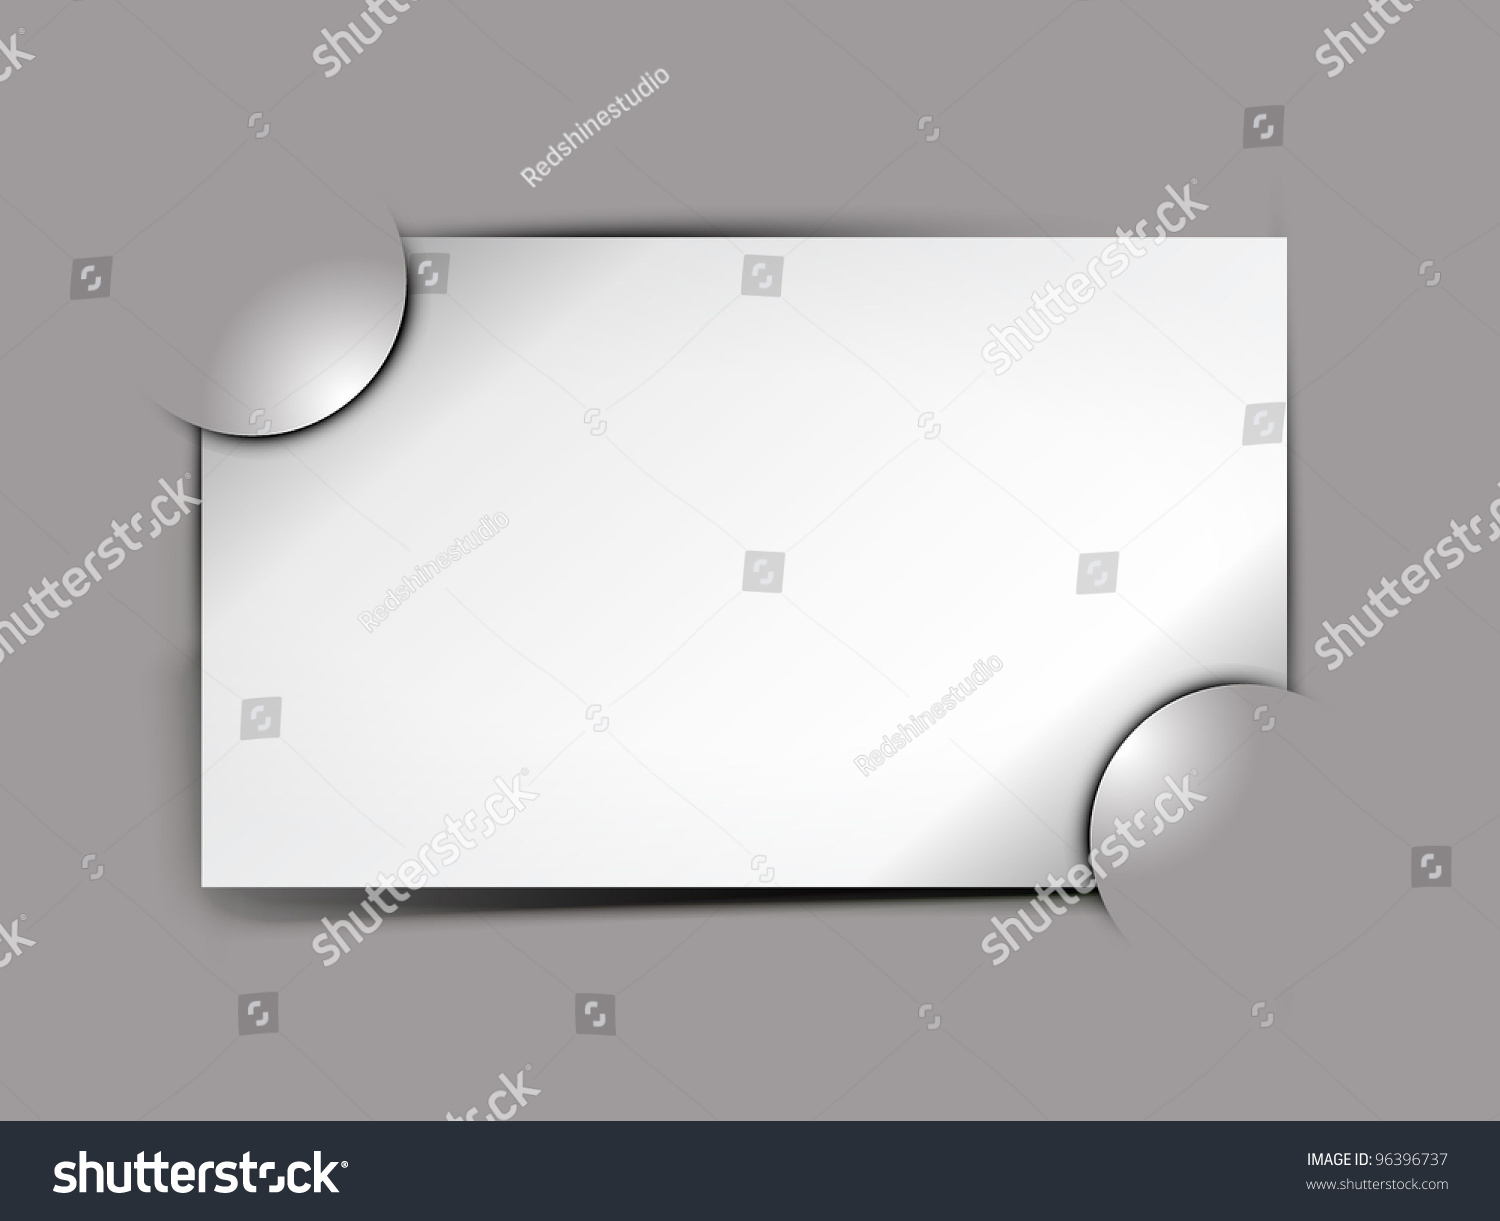 SVG of Composite empty photo frame with places for photo, eps10 vector background svg